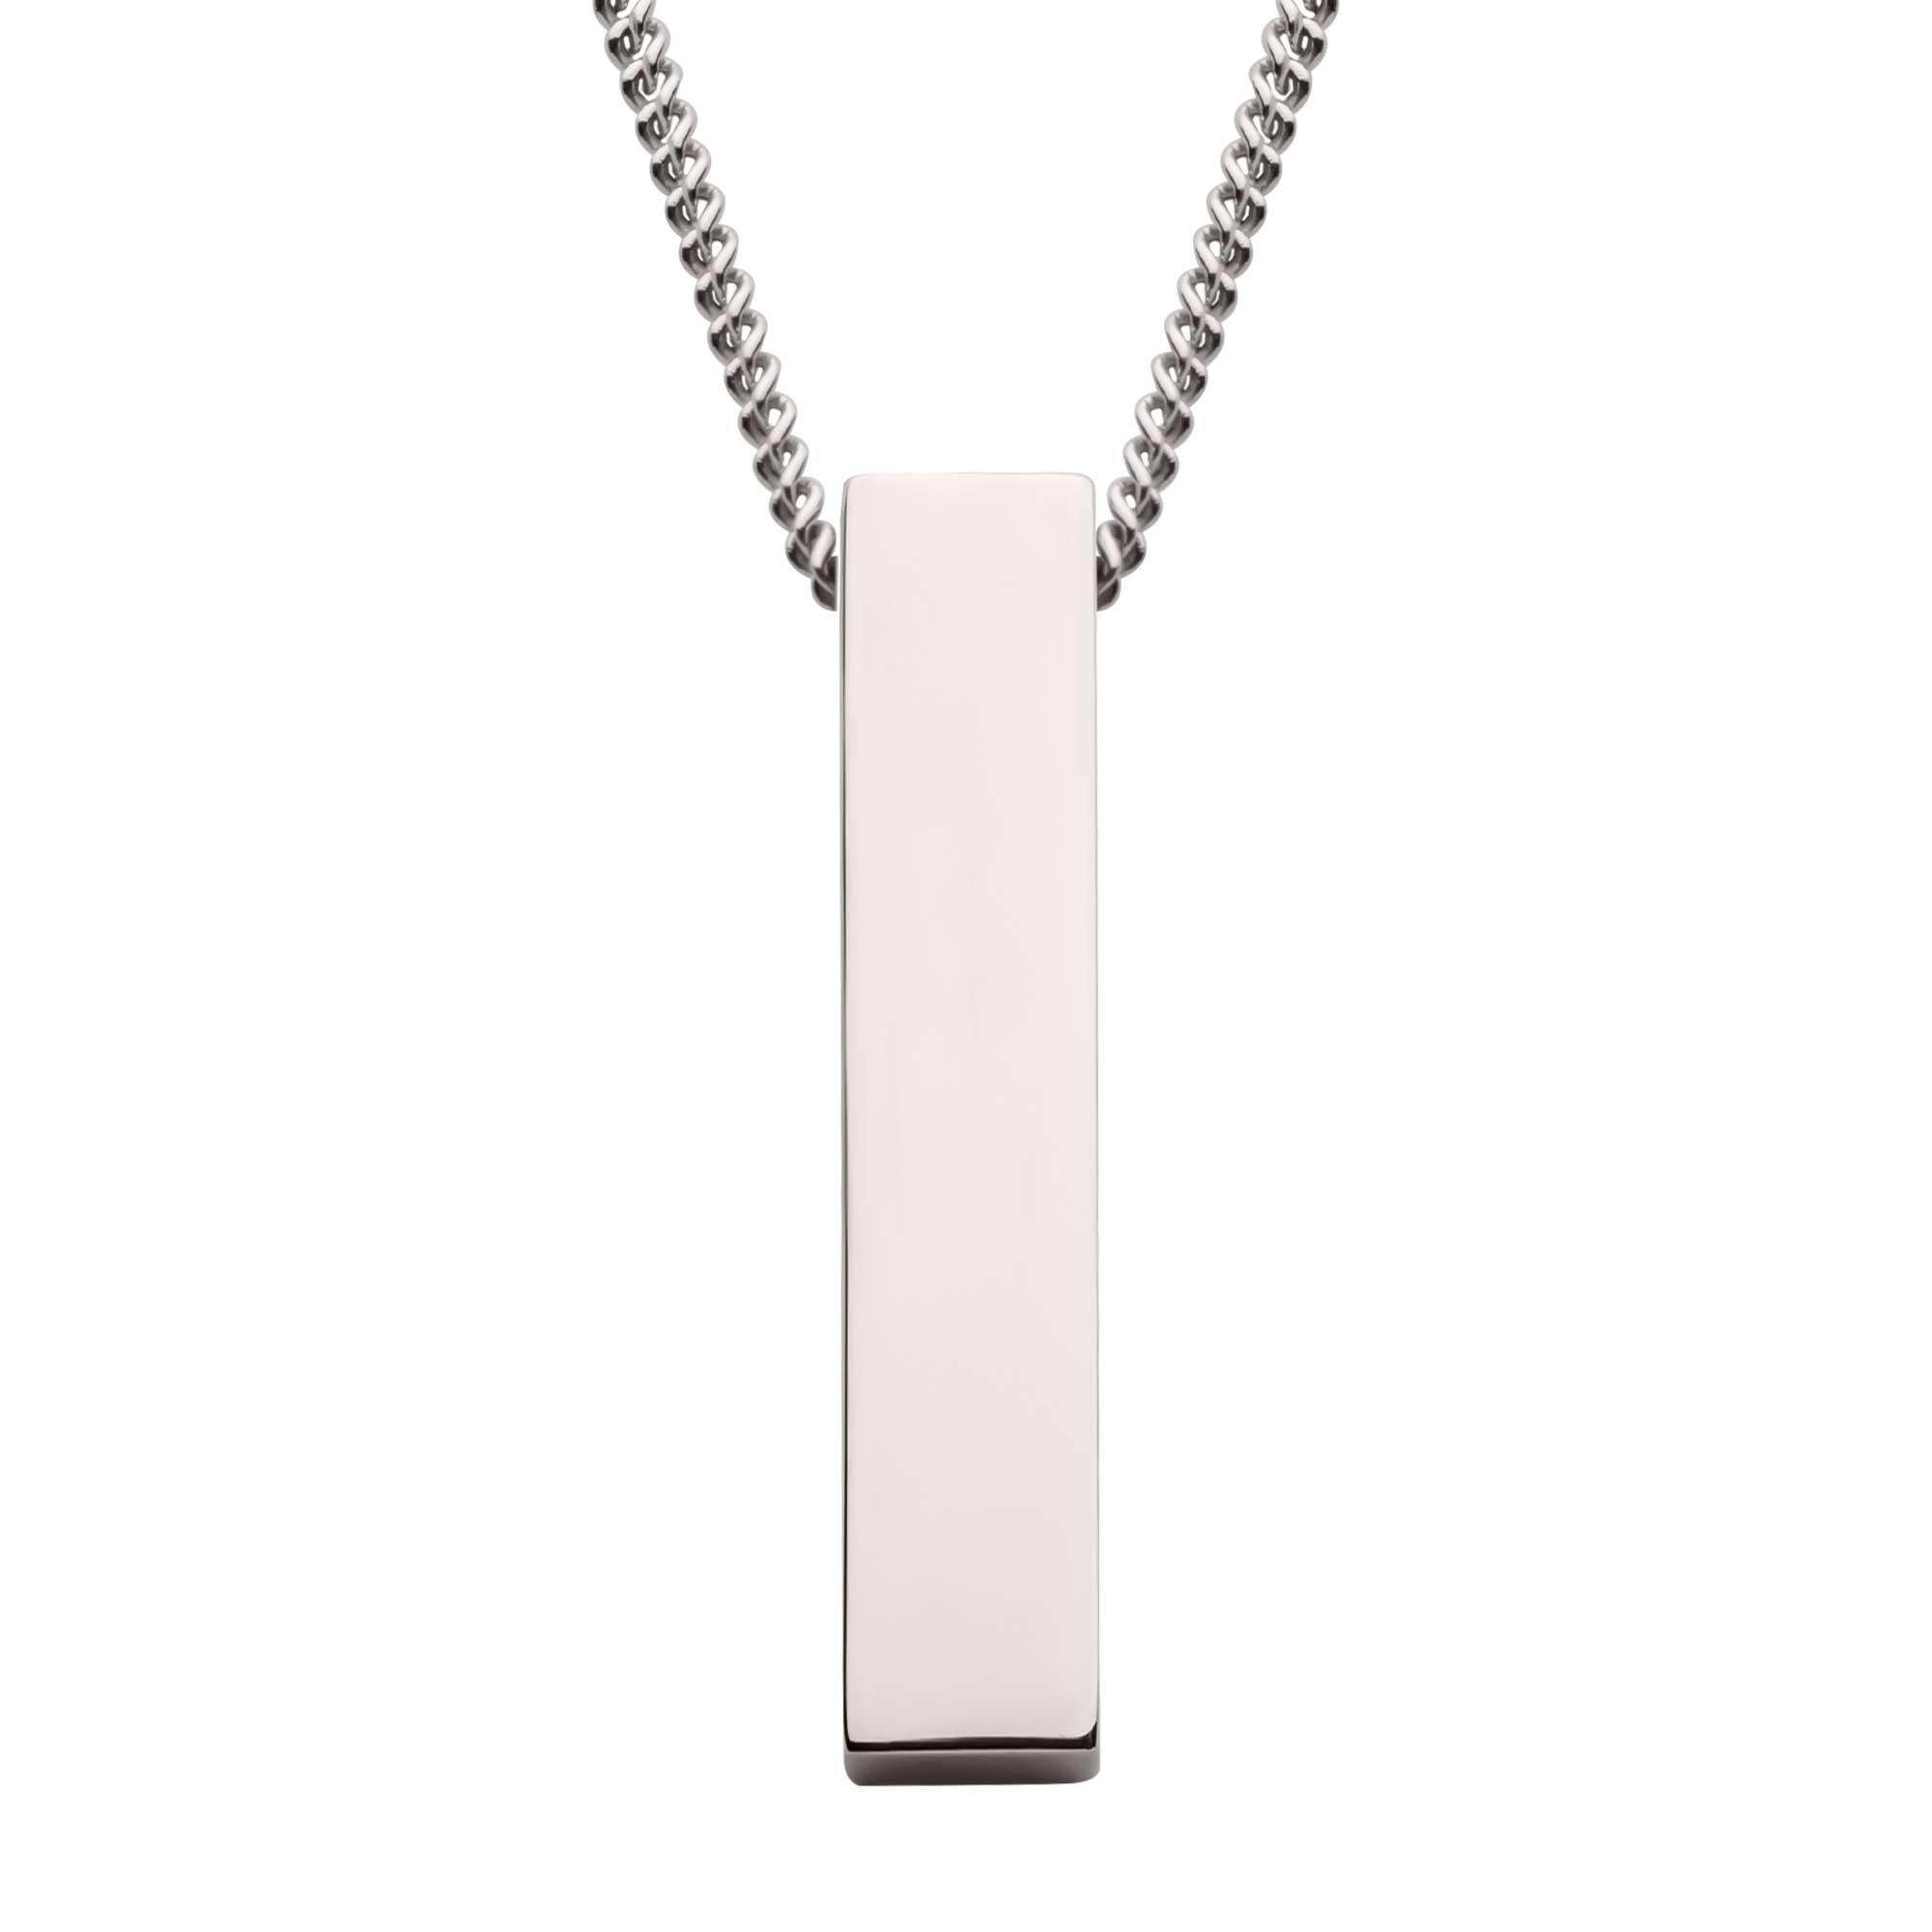 The Monolith Engravable Pendant with Chain Lewis Jewelers, Inc. Ansonia, CT